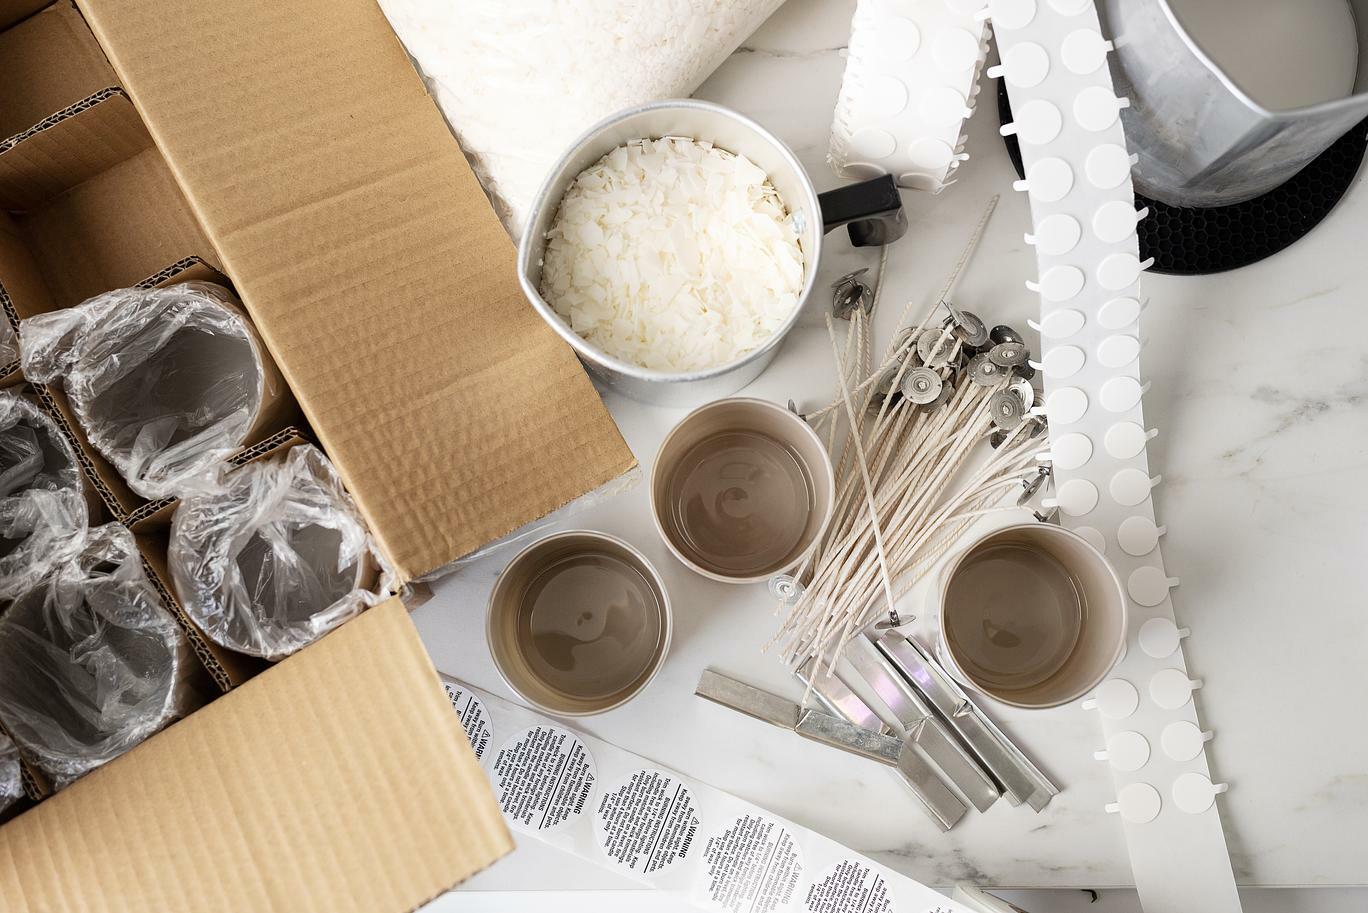 An array of candle making supplies: a cardboard box filled with empty candle jars, a metal pouring pitcher of soy wax flakes, candle wicks, candle bars, warning labels and a roll of wick stickers